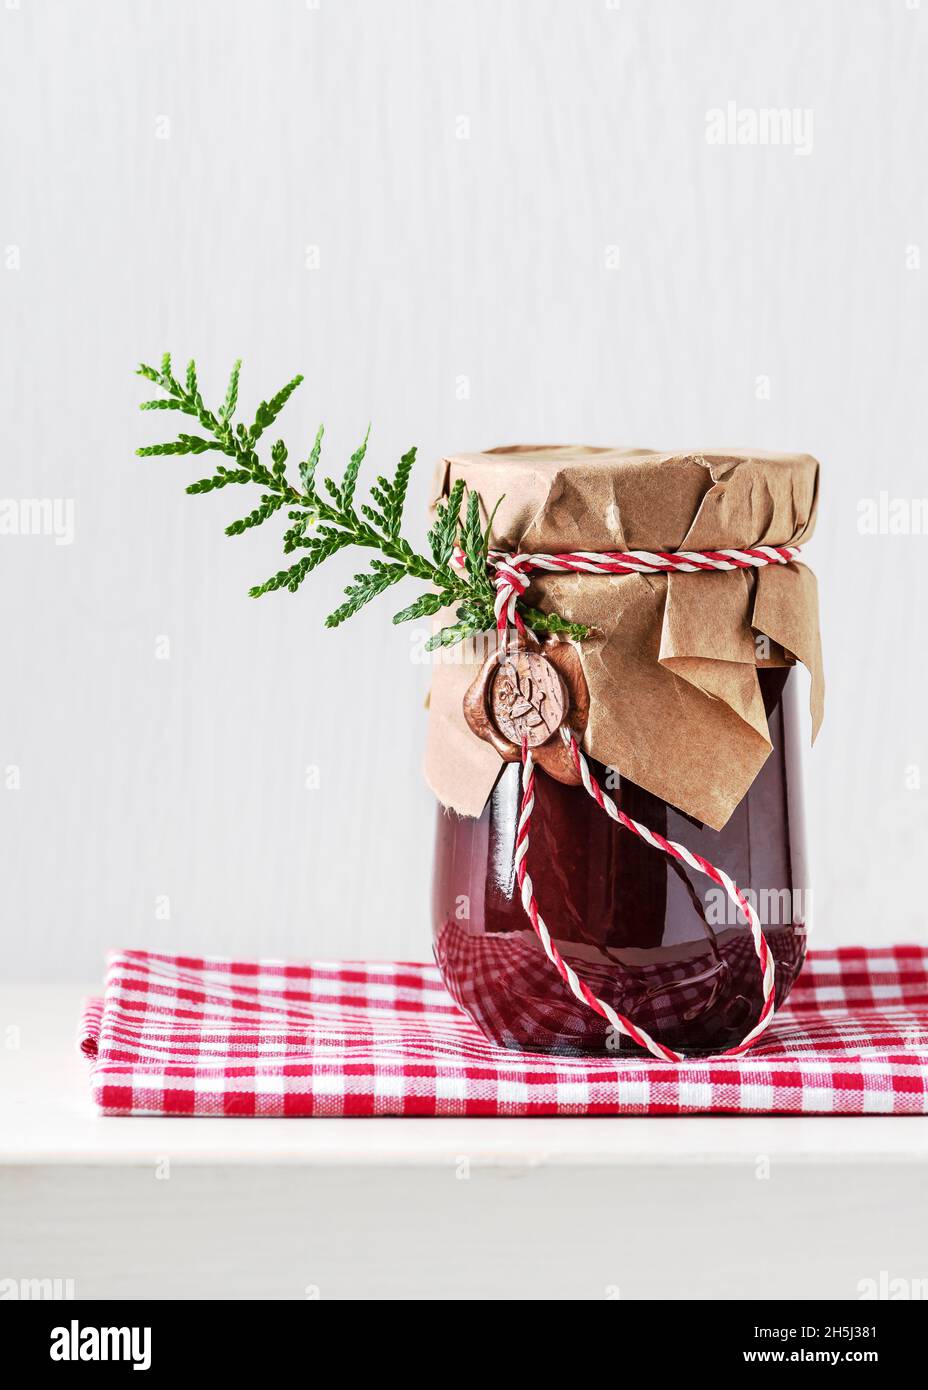 Homemade sweet organic plum jam in a jar decorated with grunge paper and wax seal. Christmas and winter holiday easy gifts idea. Stock Photo